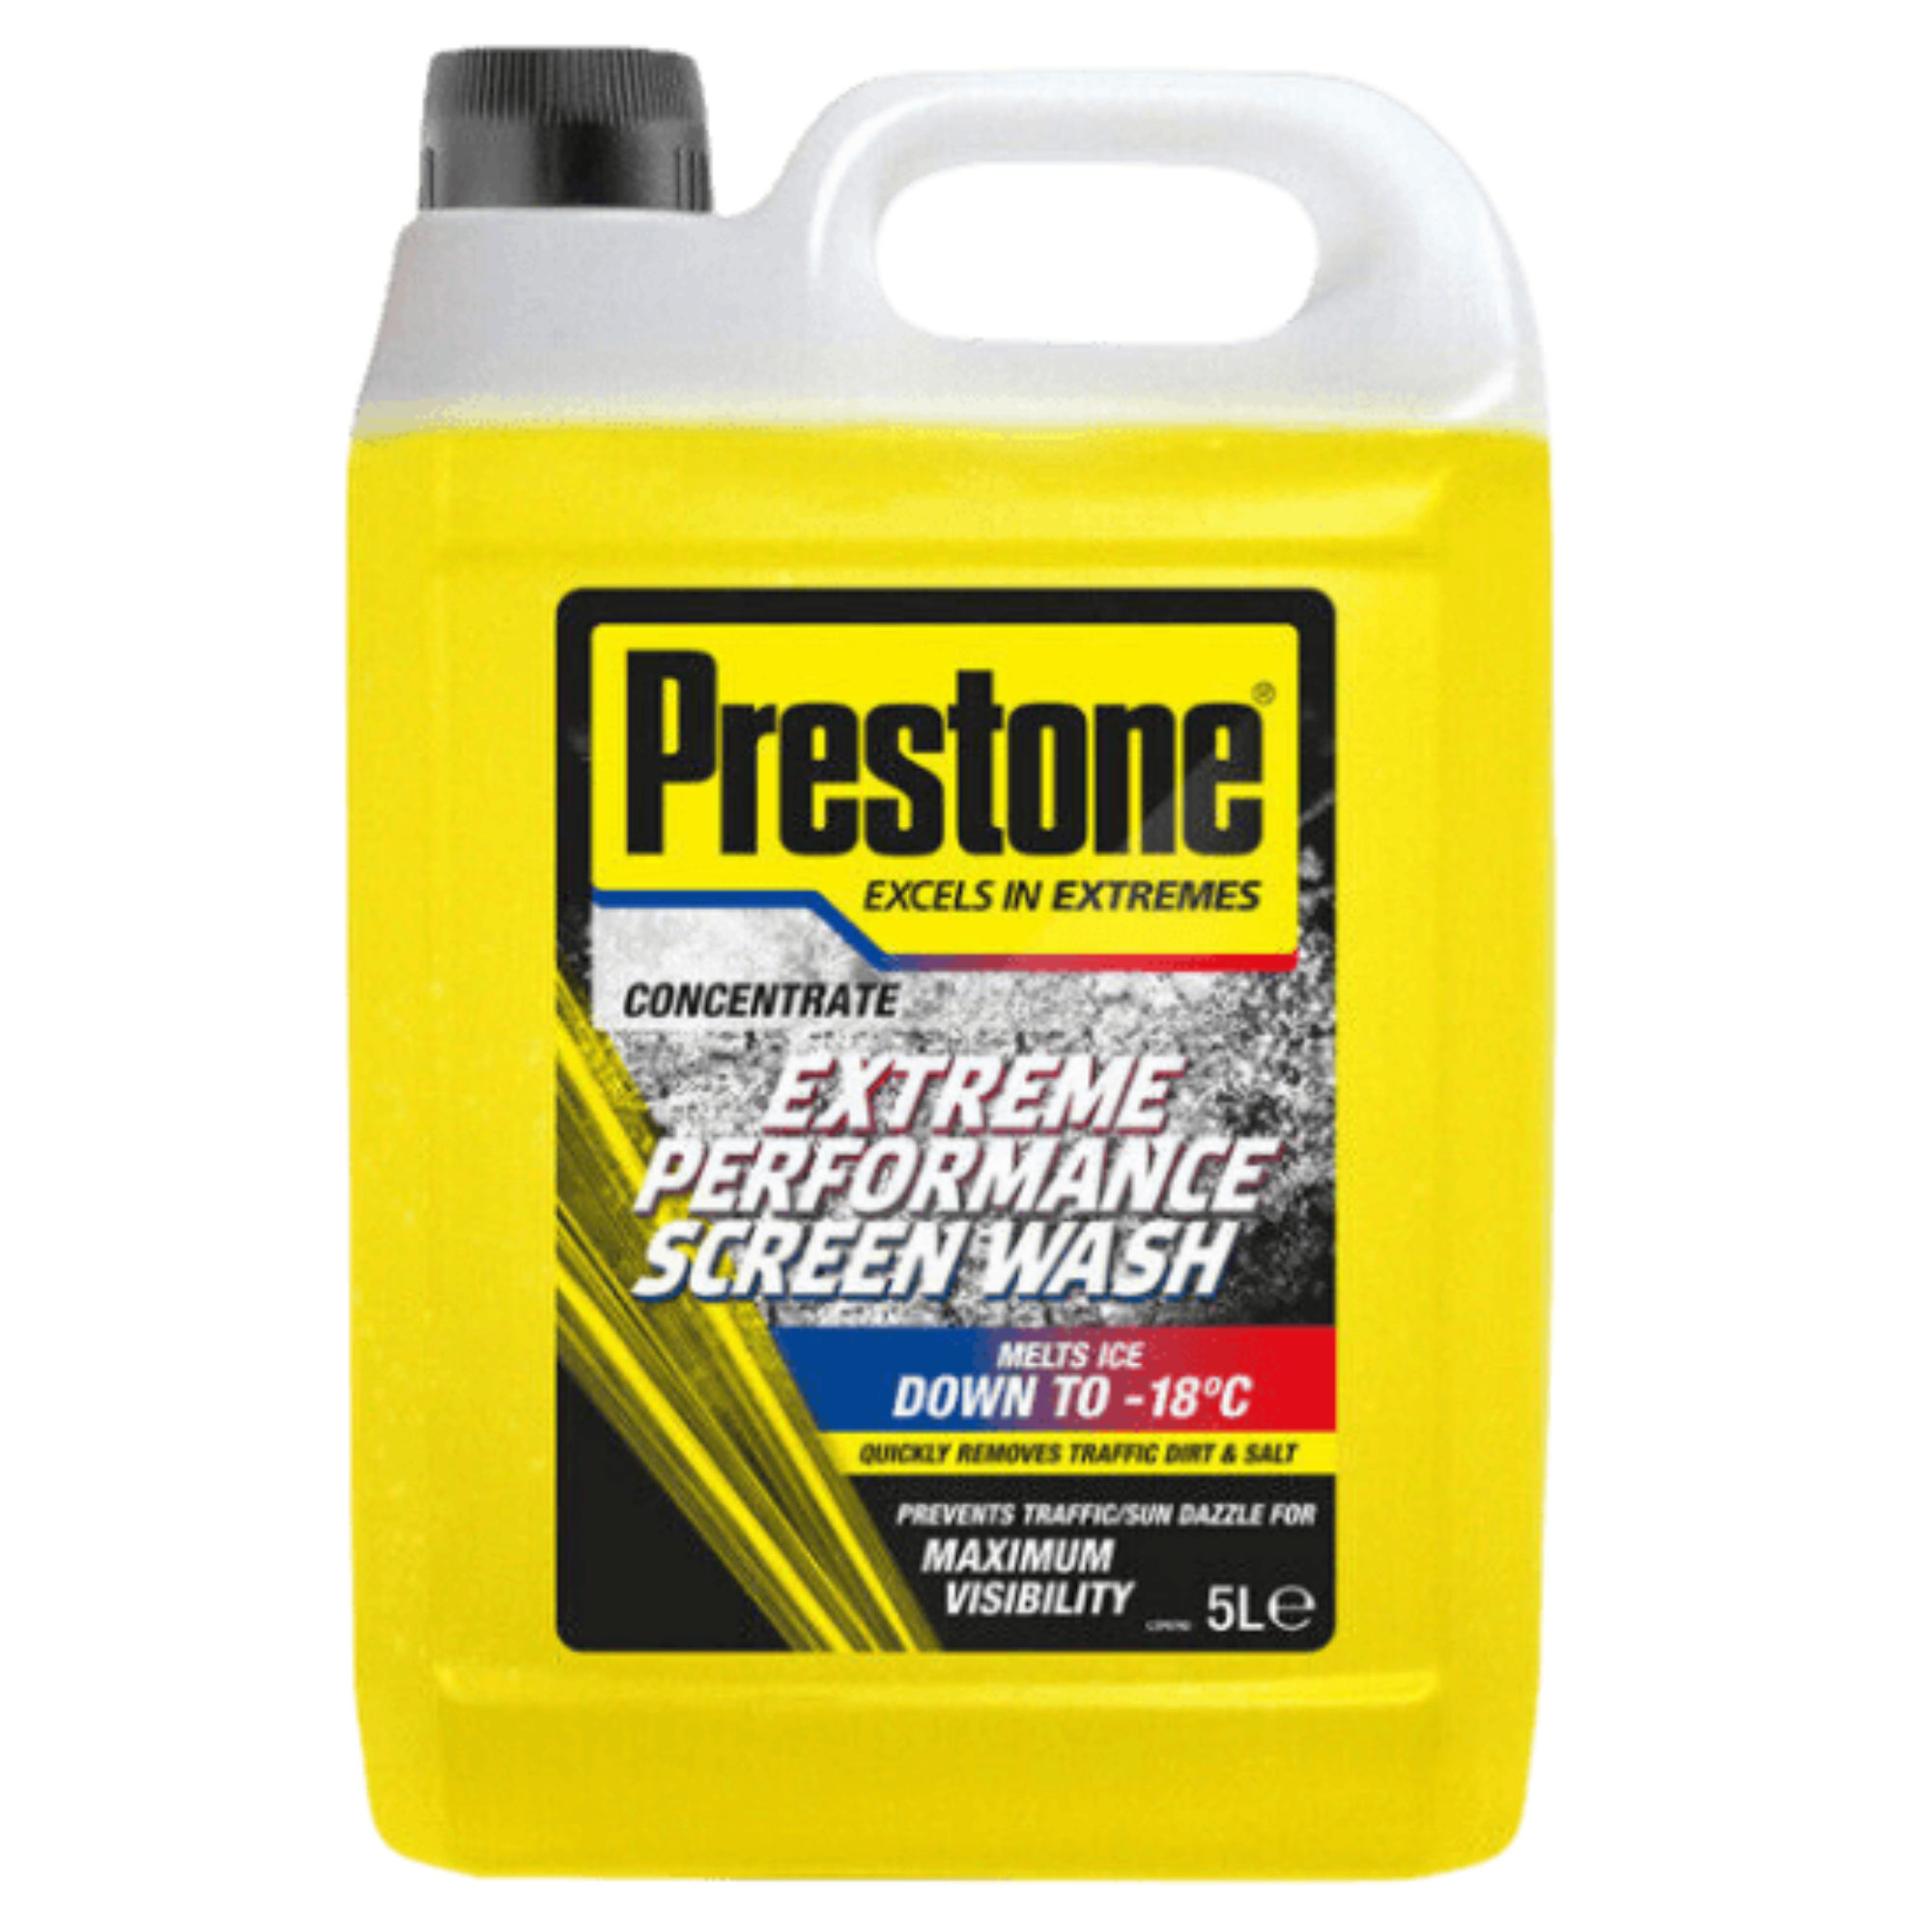 Prestone Extreme Performance Concentrated Screenwash 5 Litre